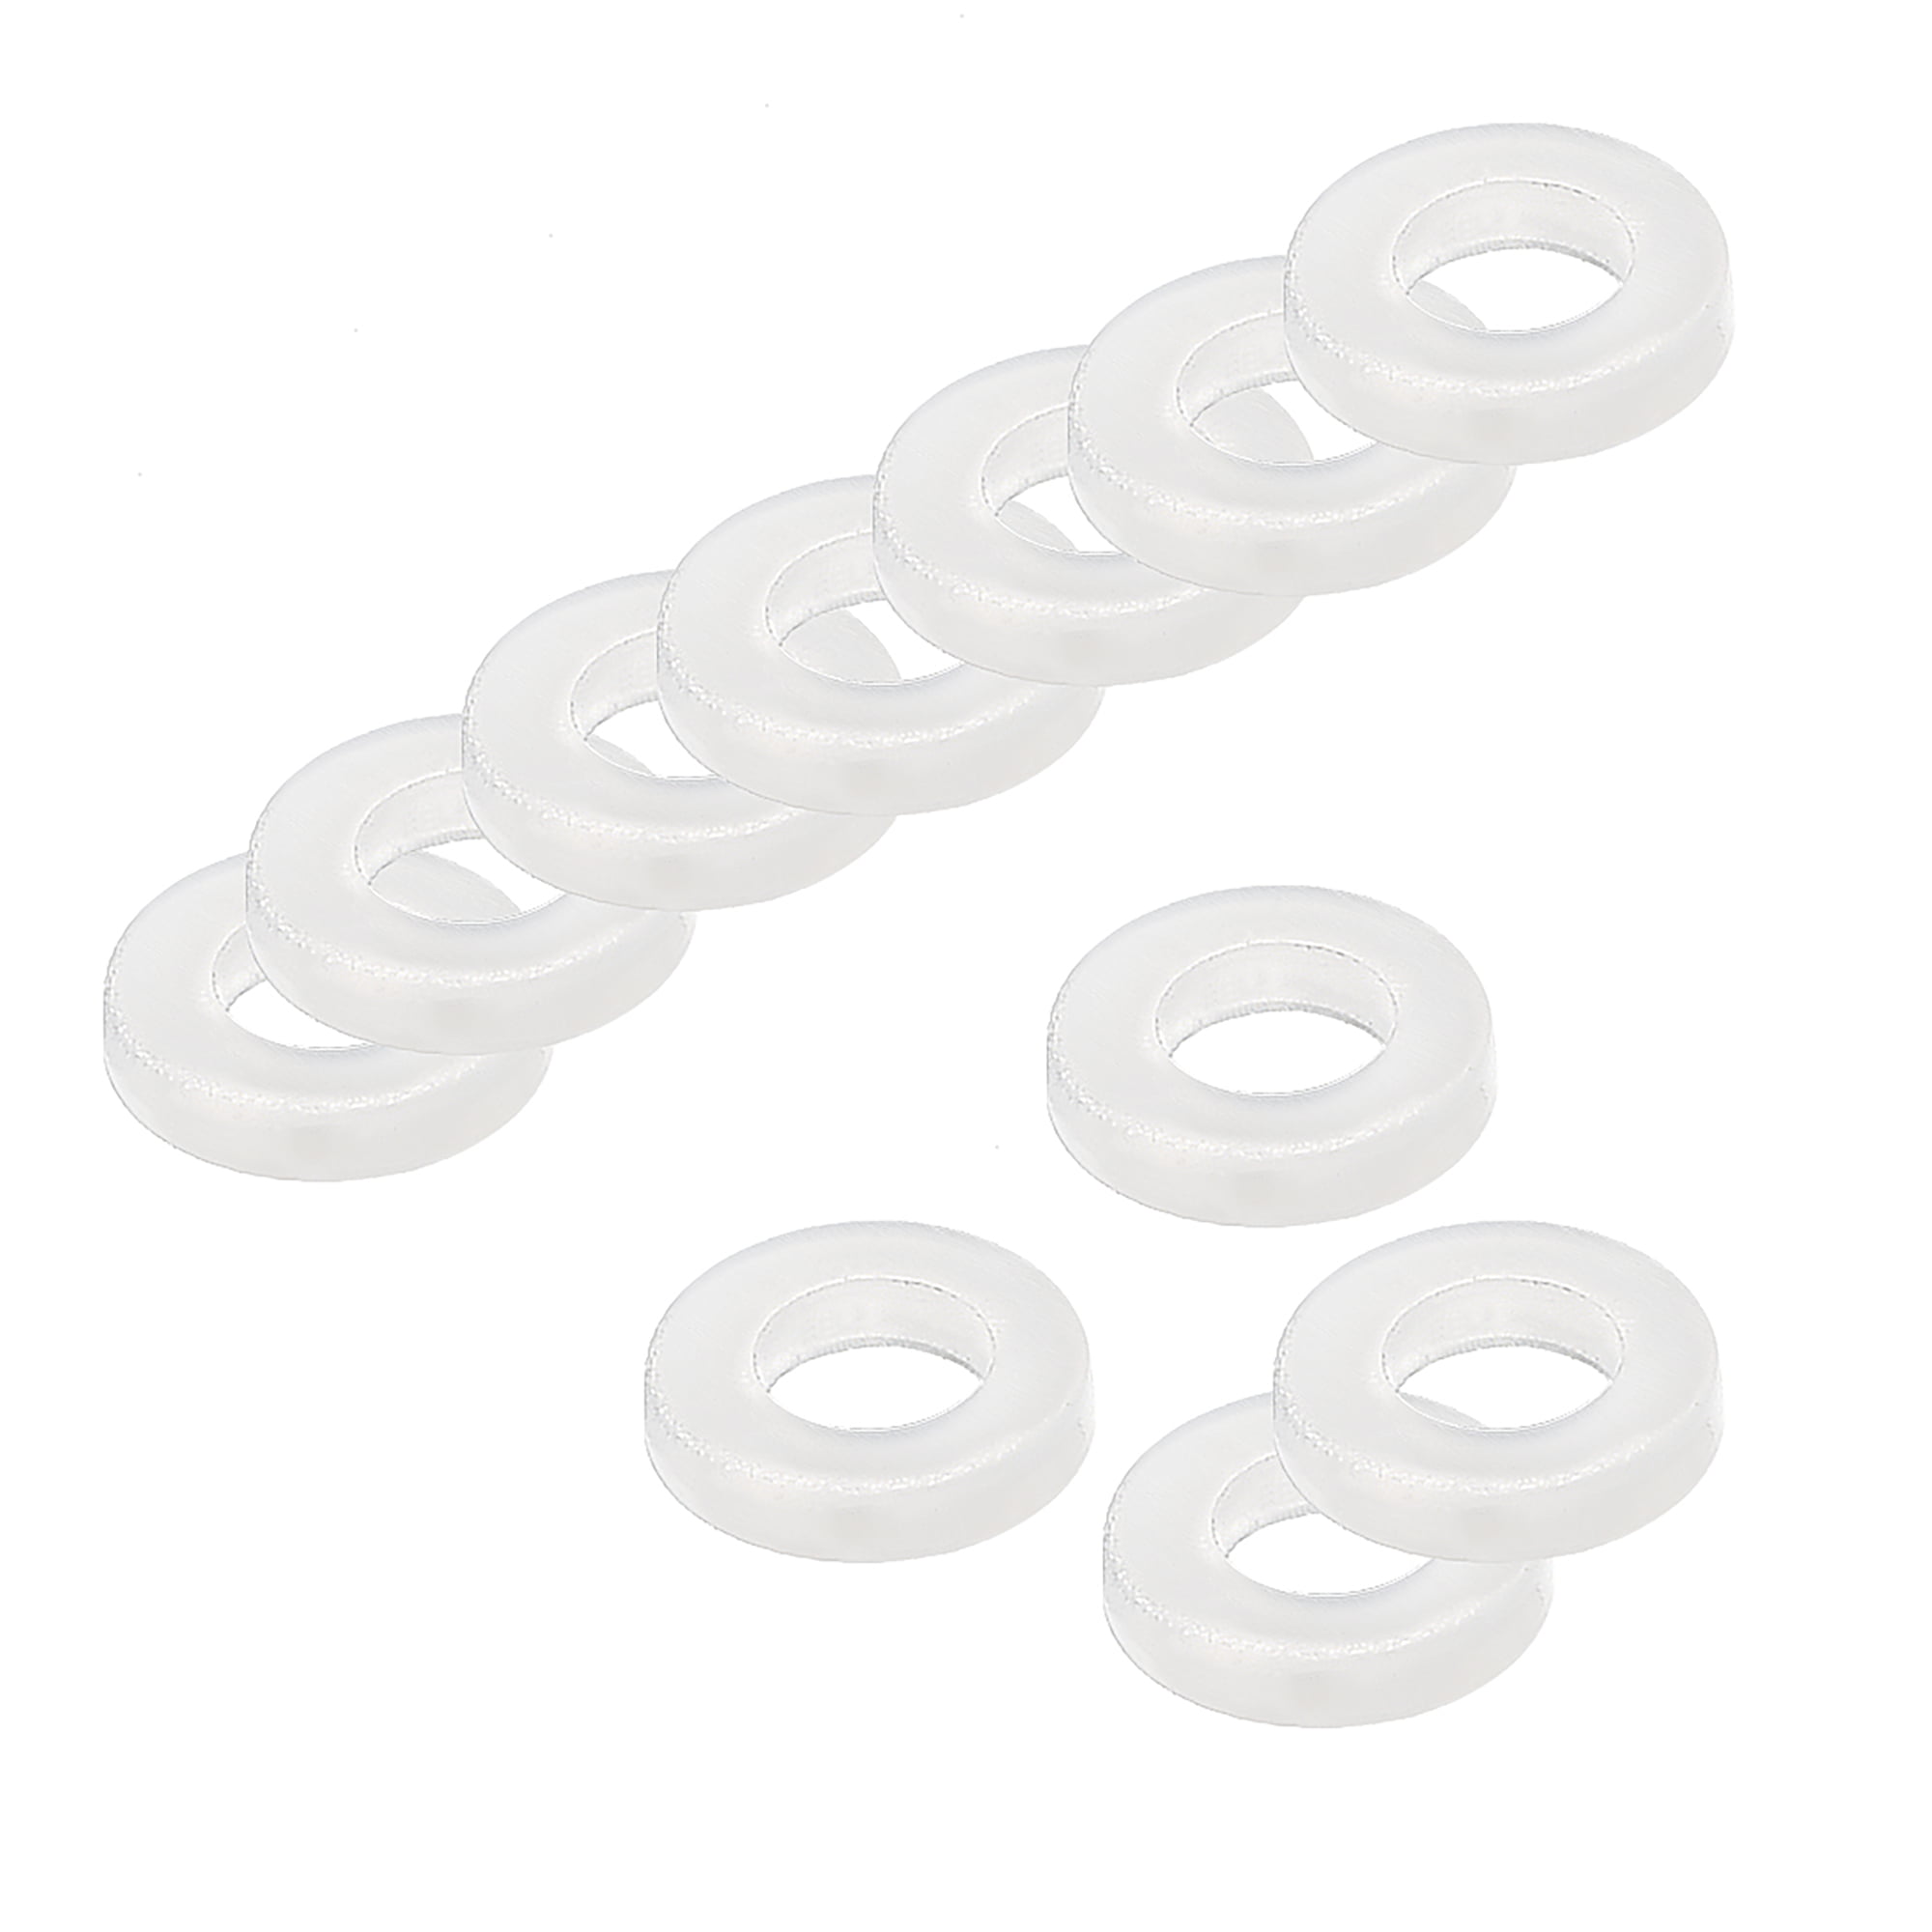 56mm 200x PLASTIC WHITE WASHERS FOR INSULATION BOARDS 